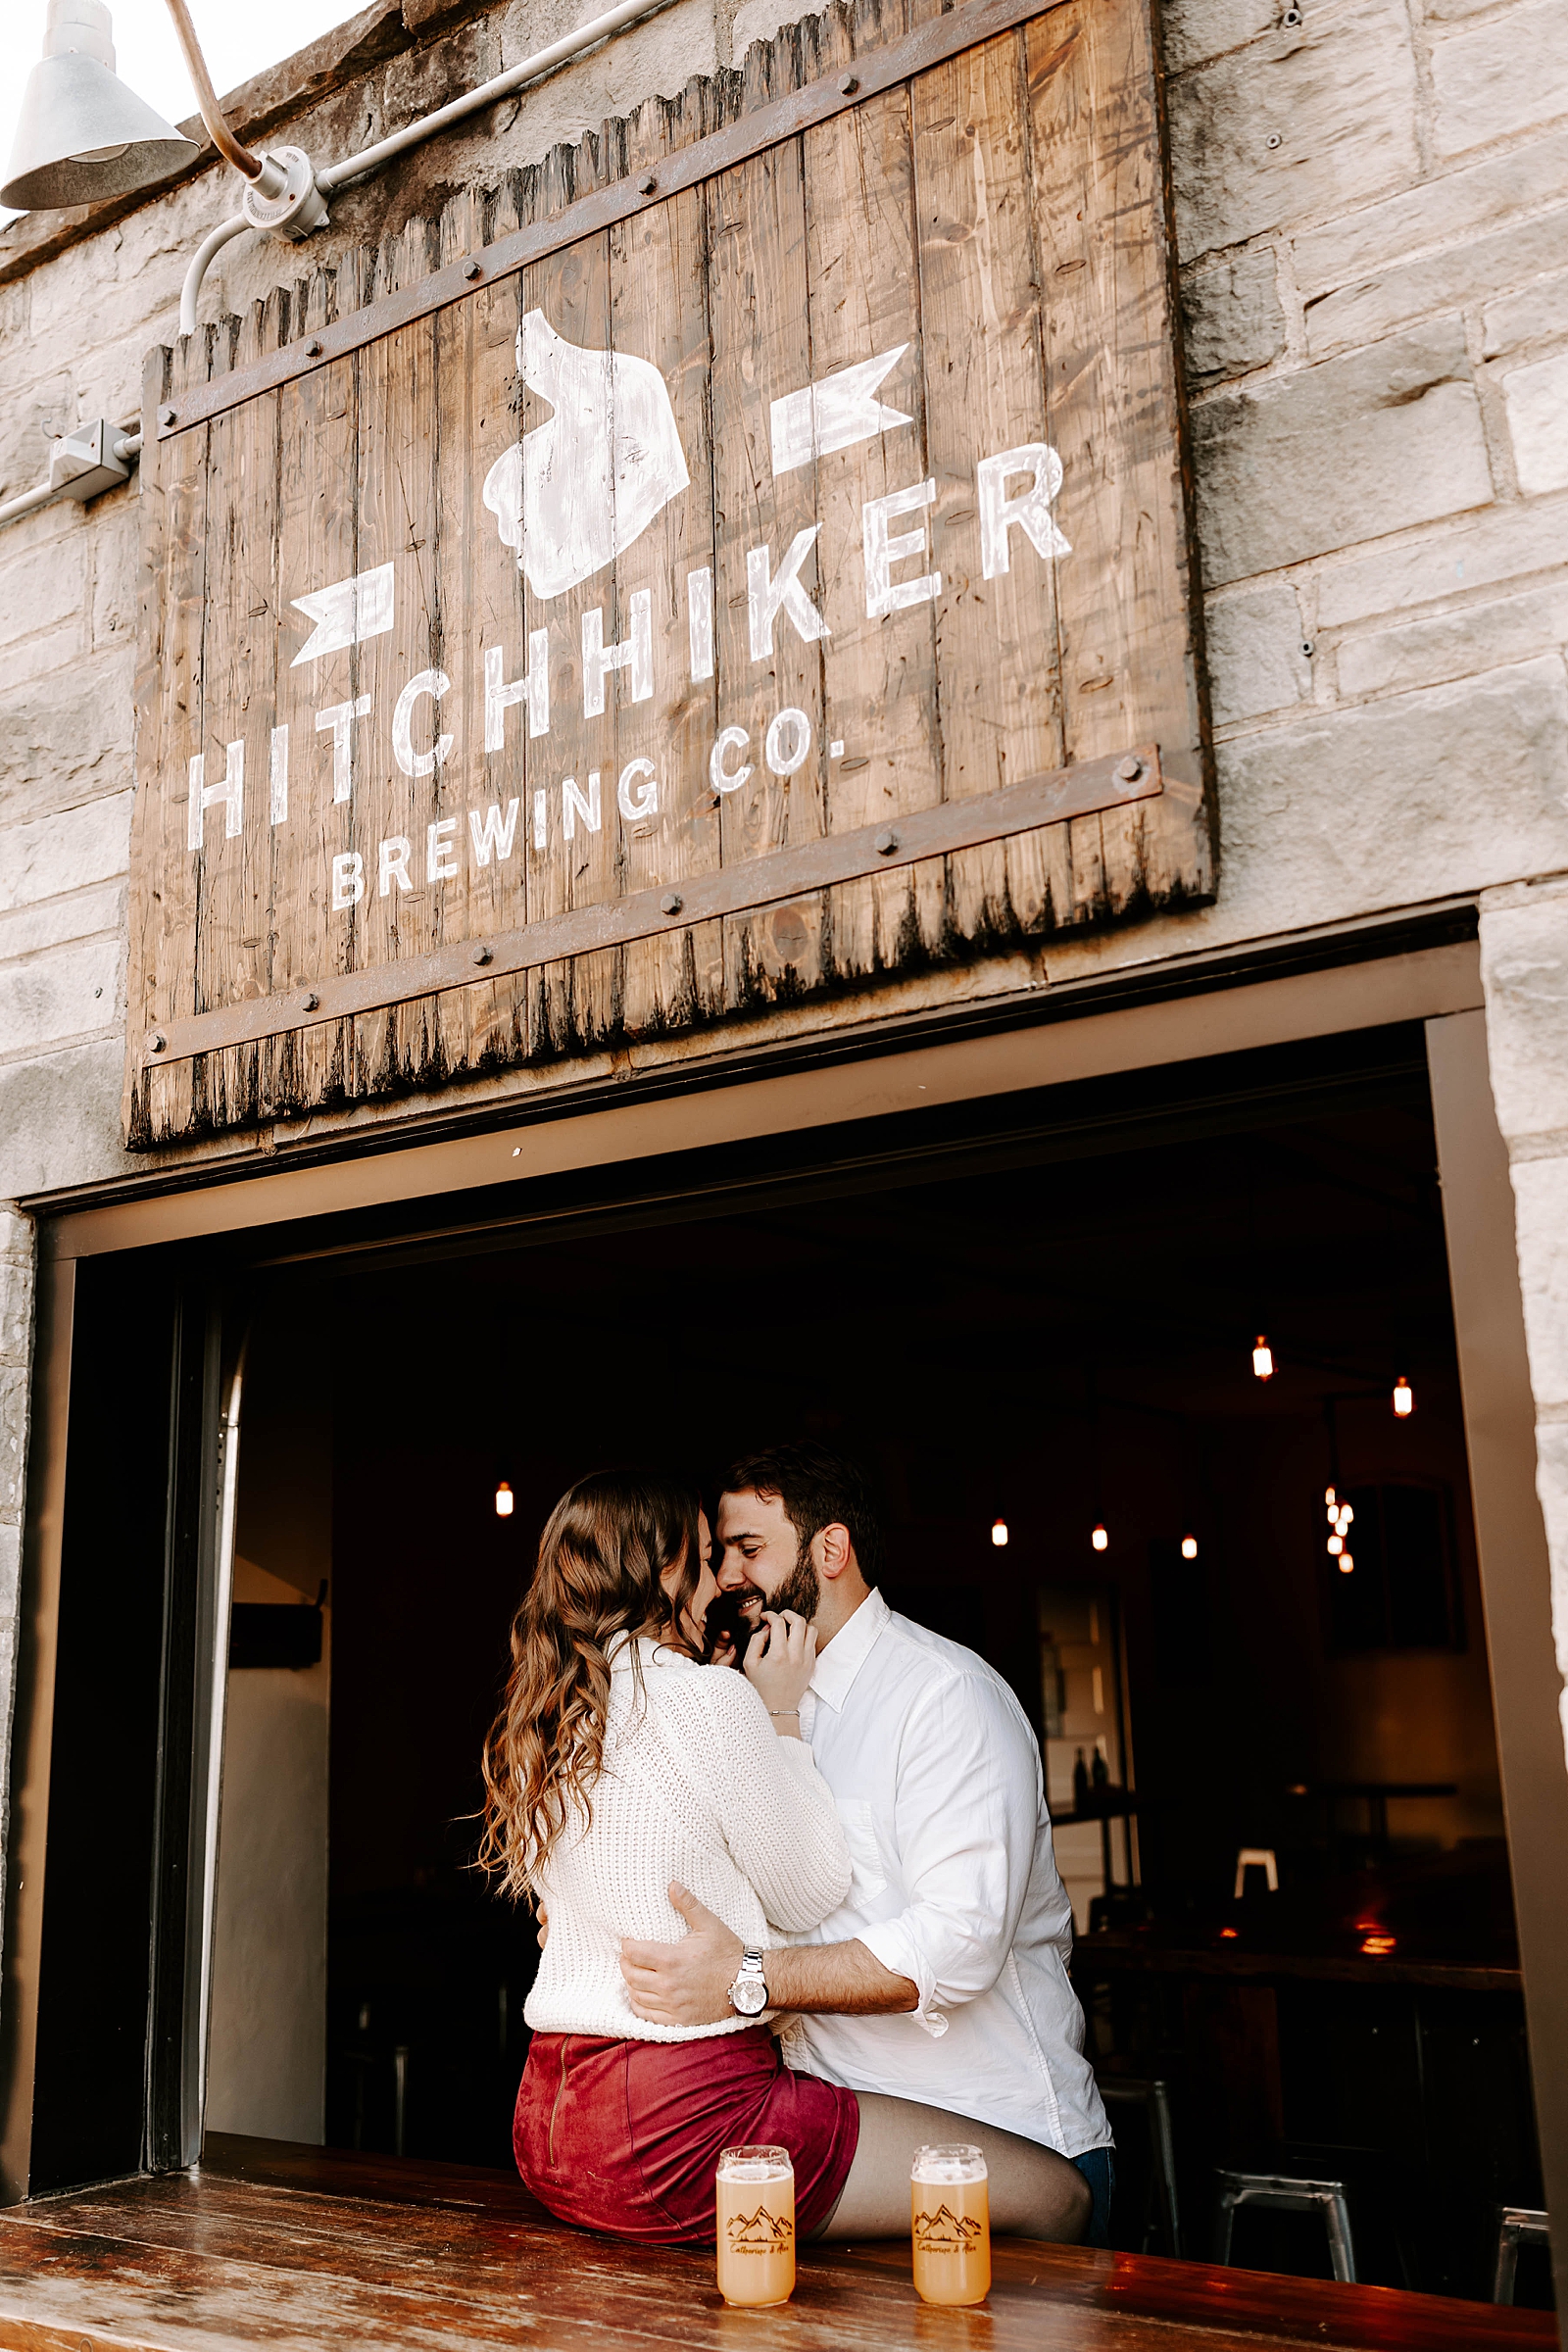 Pittsburgh Brewery; Hitchhikers Brewing Co. Mt. Lebanon; engagement sessions; Rachel Wehan Photographer